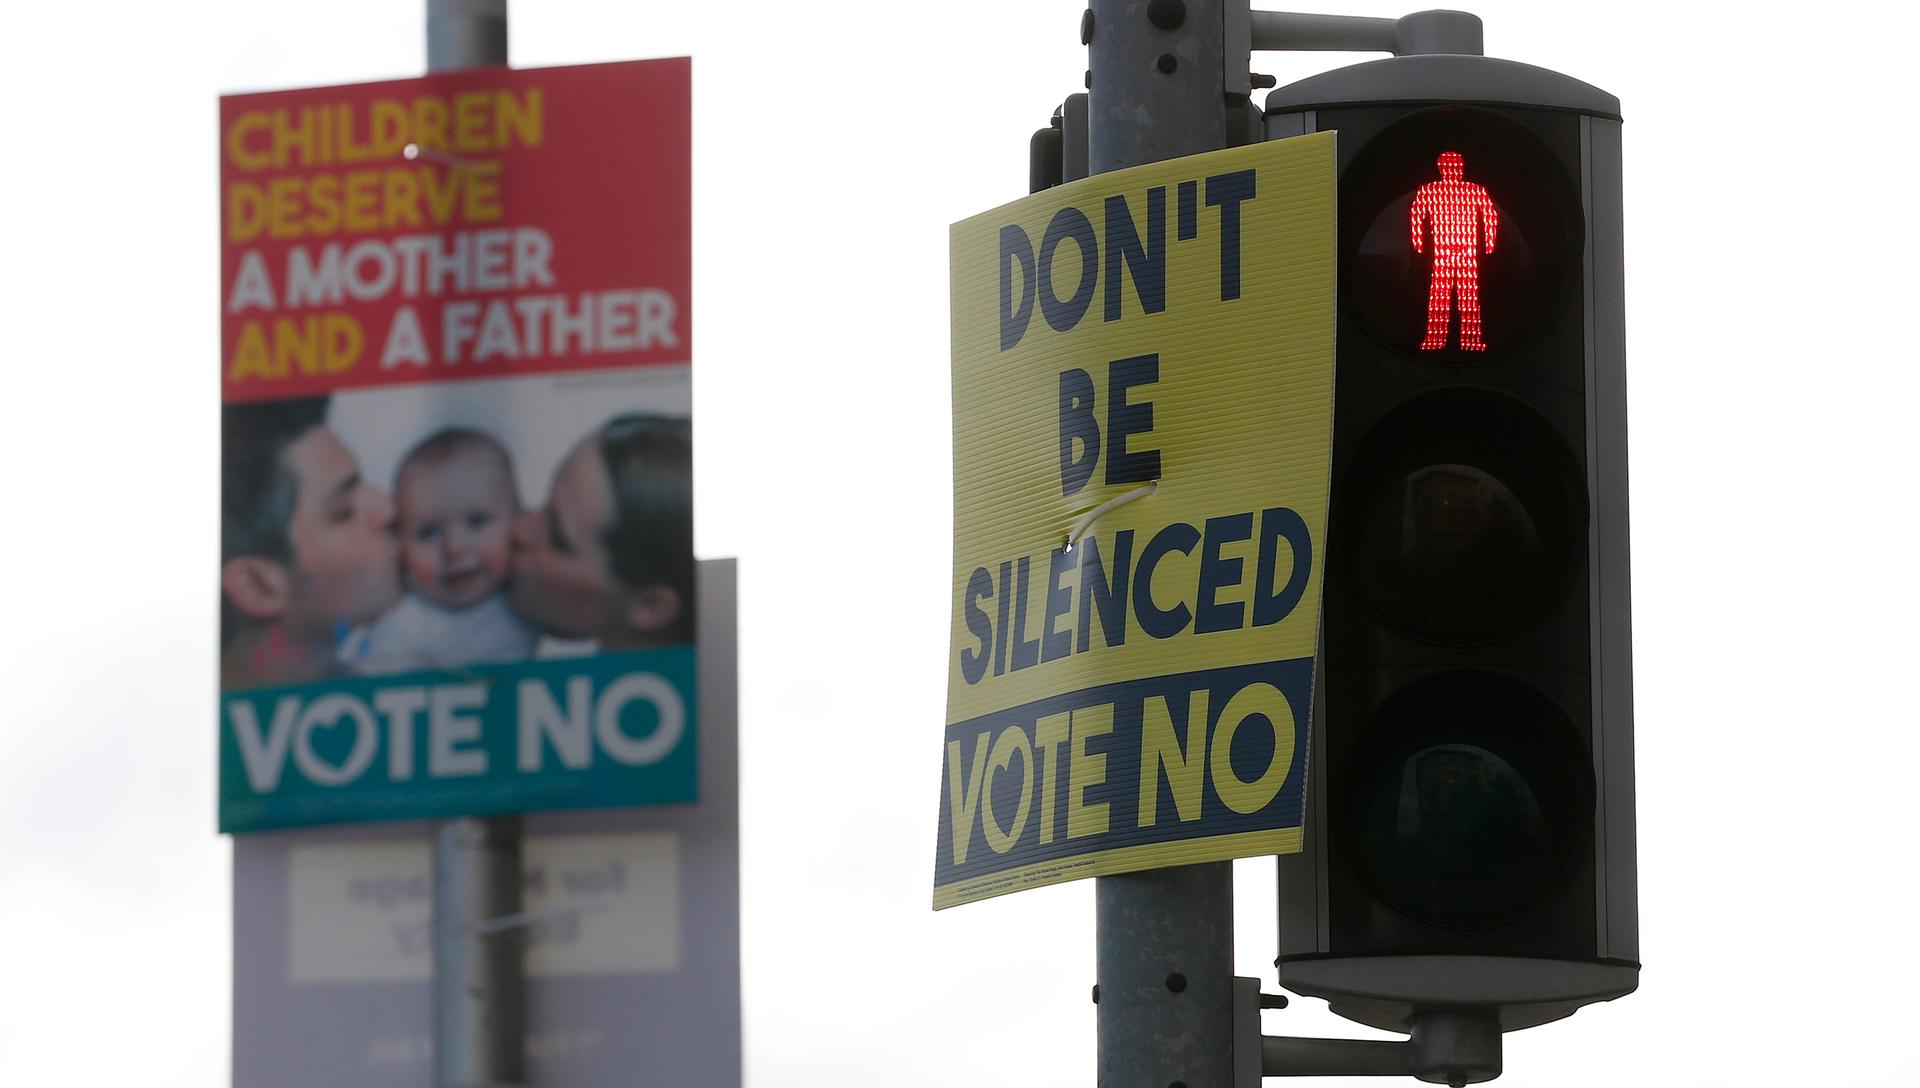 Posters supporting a No vote on Ireland's same-sex marriage referendum are displayed in the Temple Bar area of Dublin on May 19, 2015.